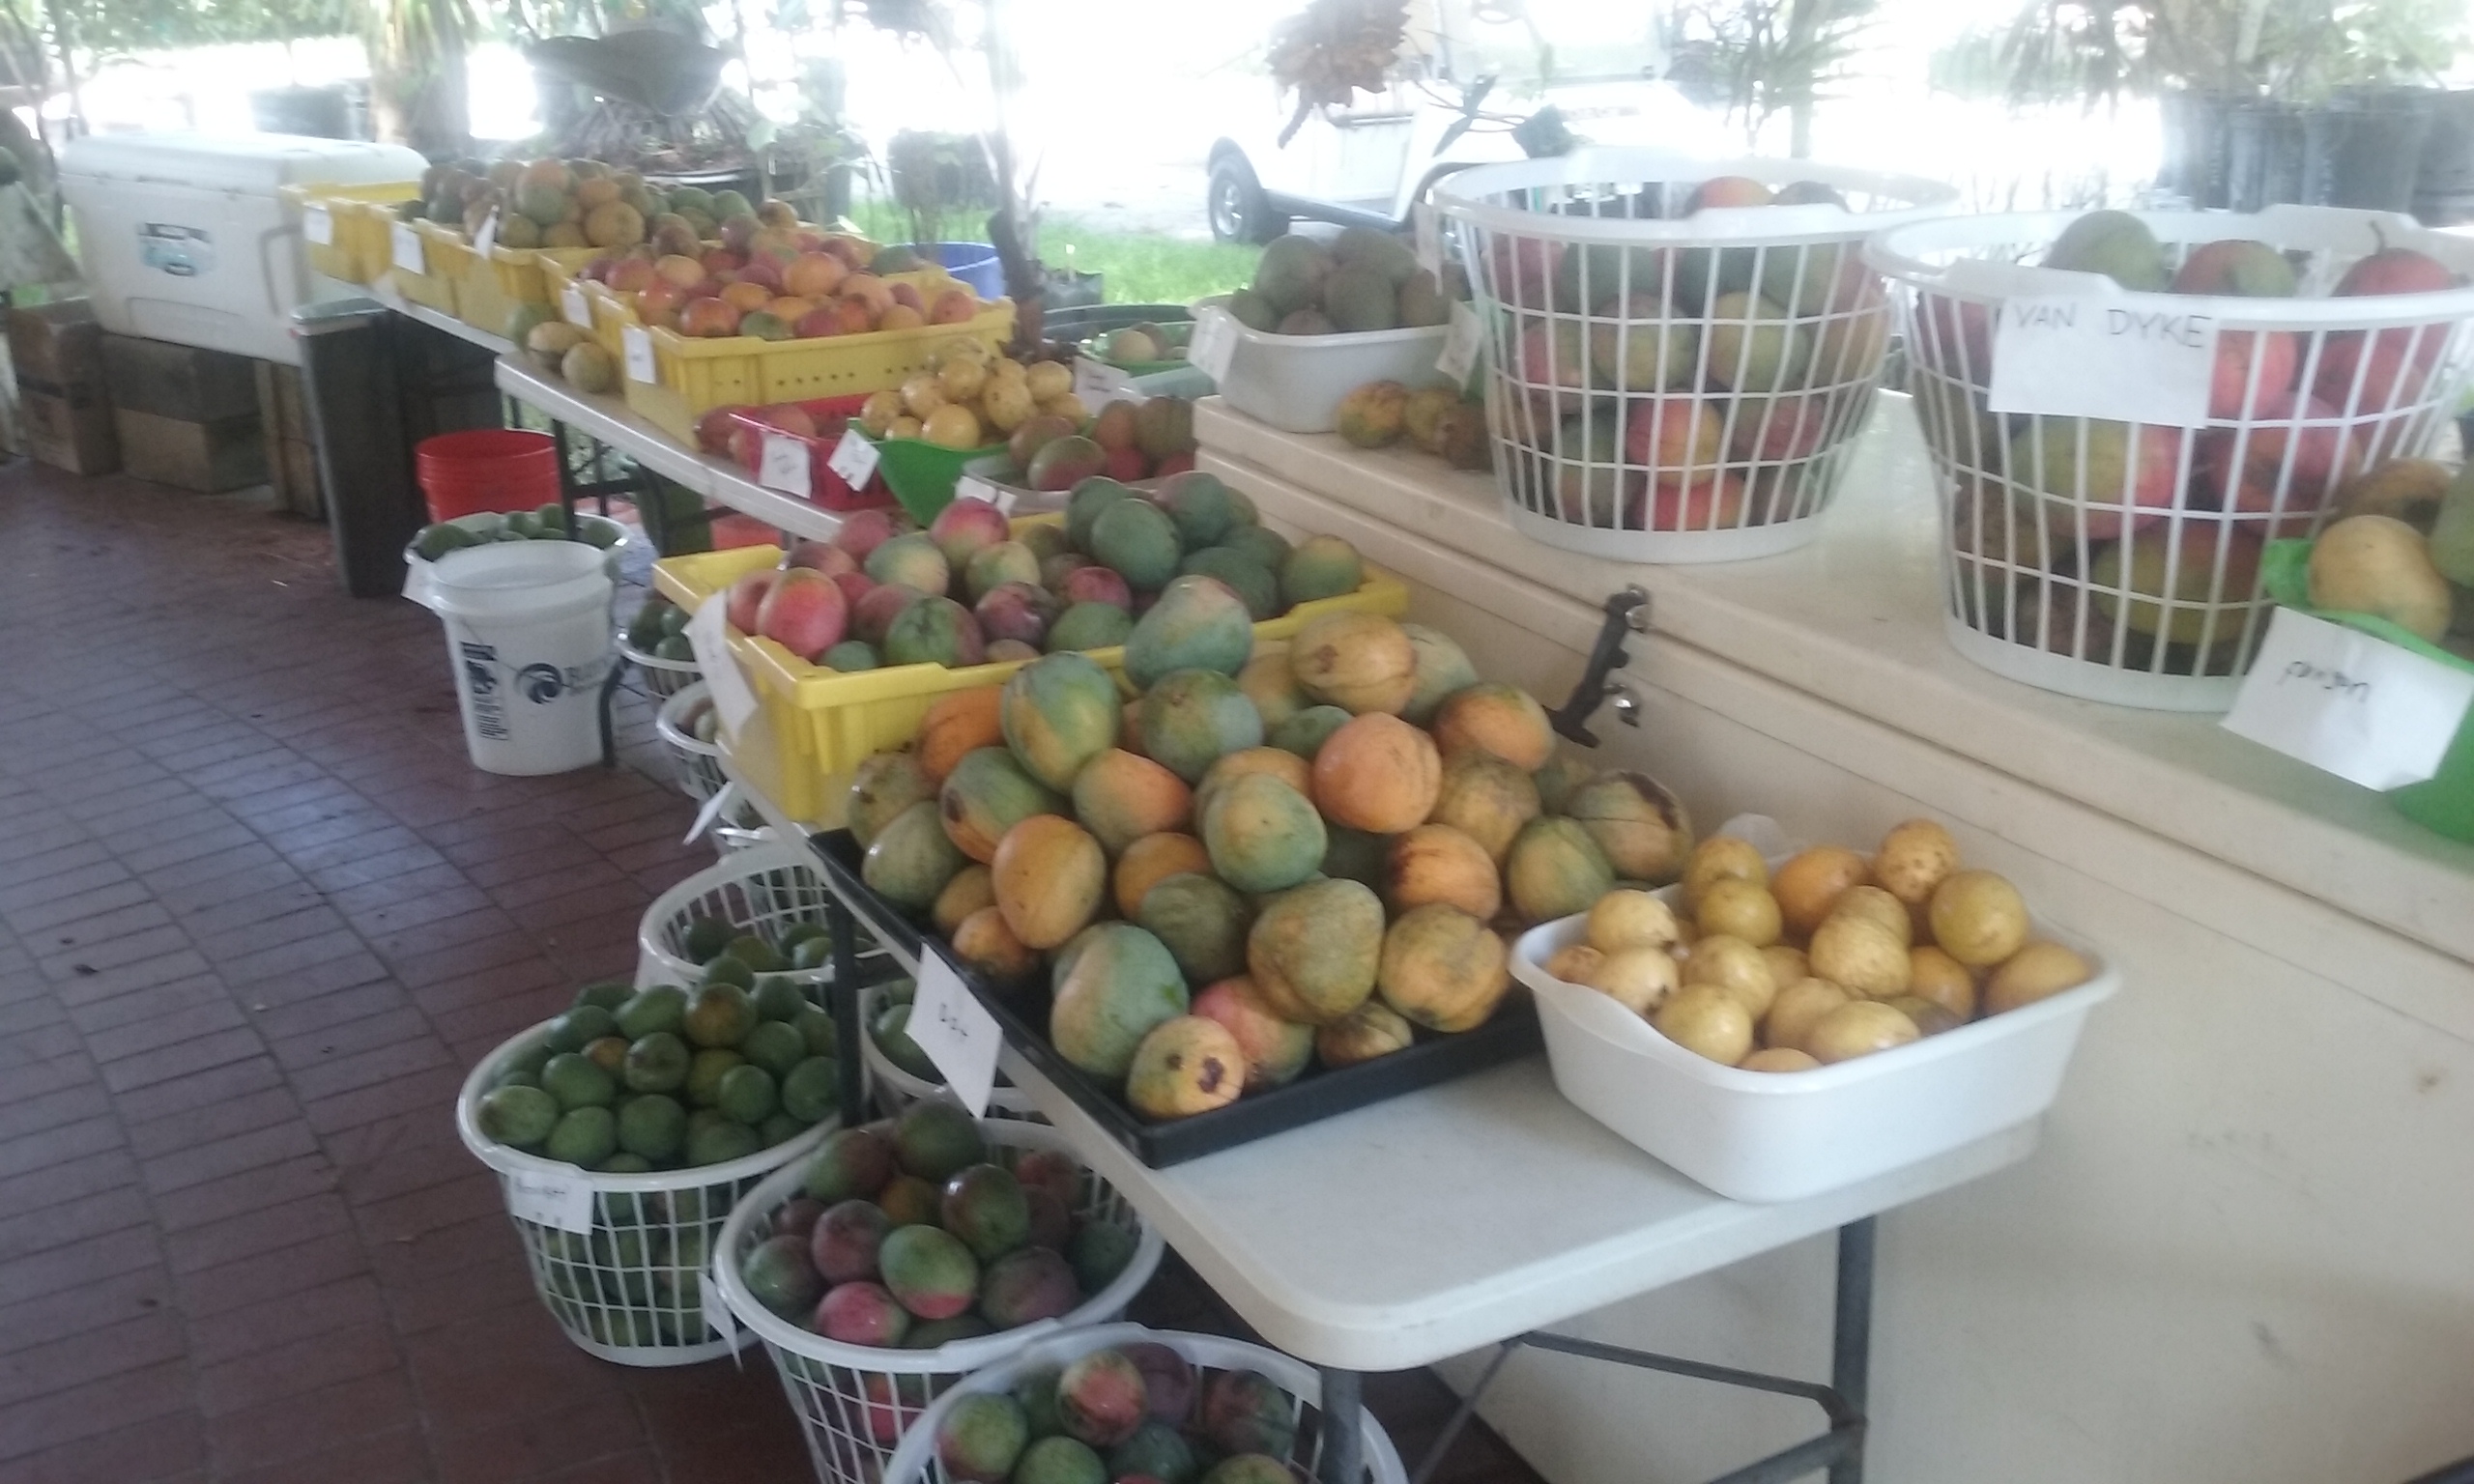 Excalibur fruit trees 5200 fearnley rd lake worth fl 33467